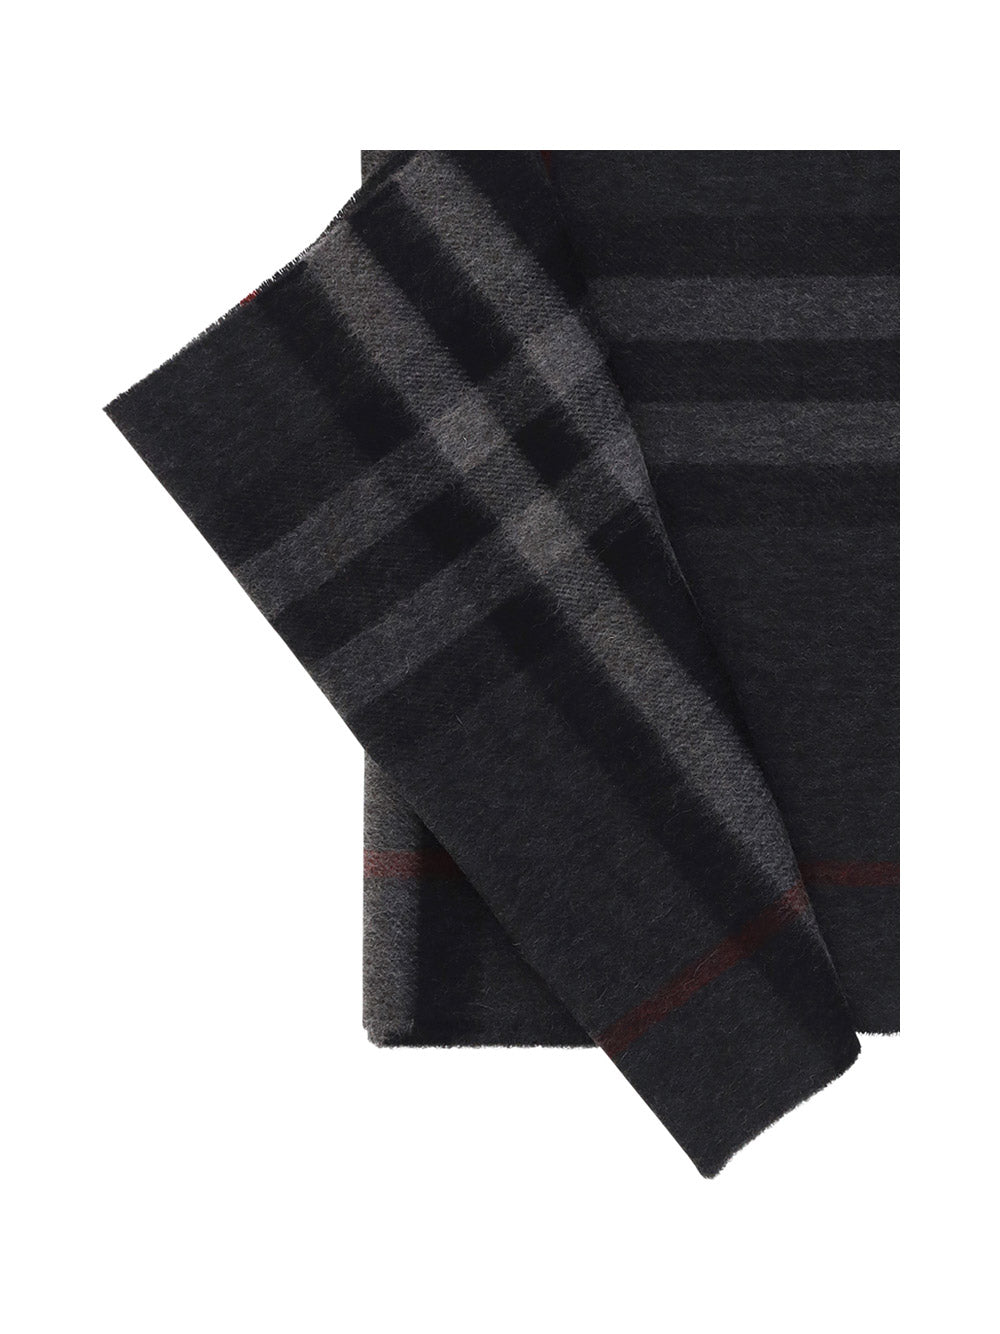 The Classic Check Cashmere Scarf - Charcoal